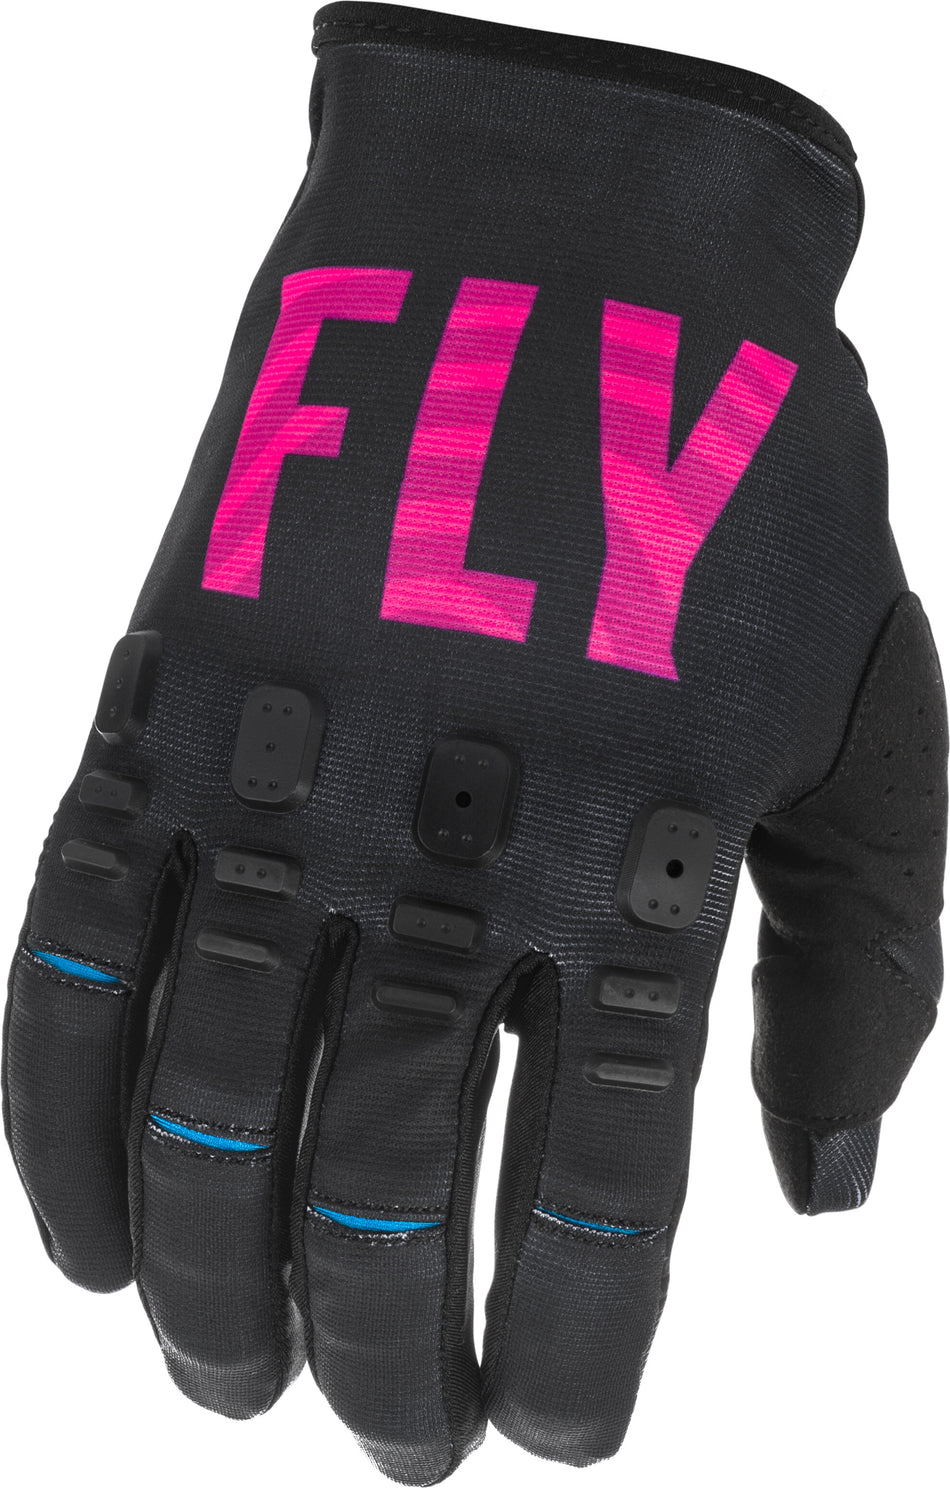 FLY RACING Kinetic S.E. Gloves Black/Pink/Blue Sz 10 374-51910